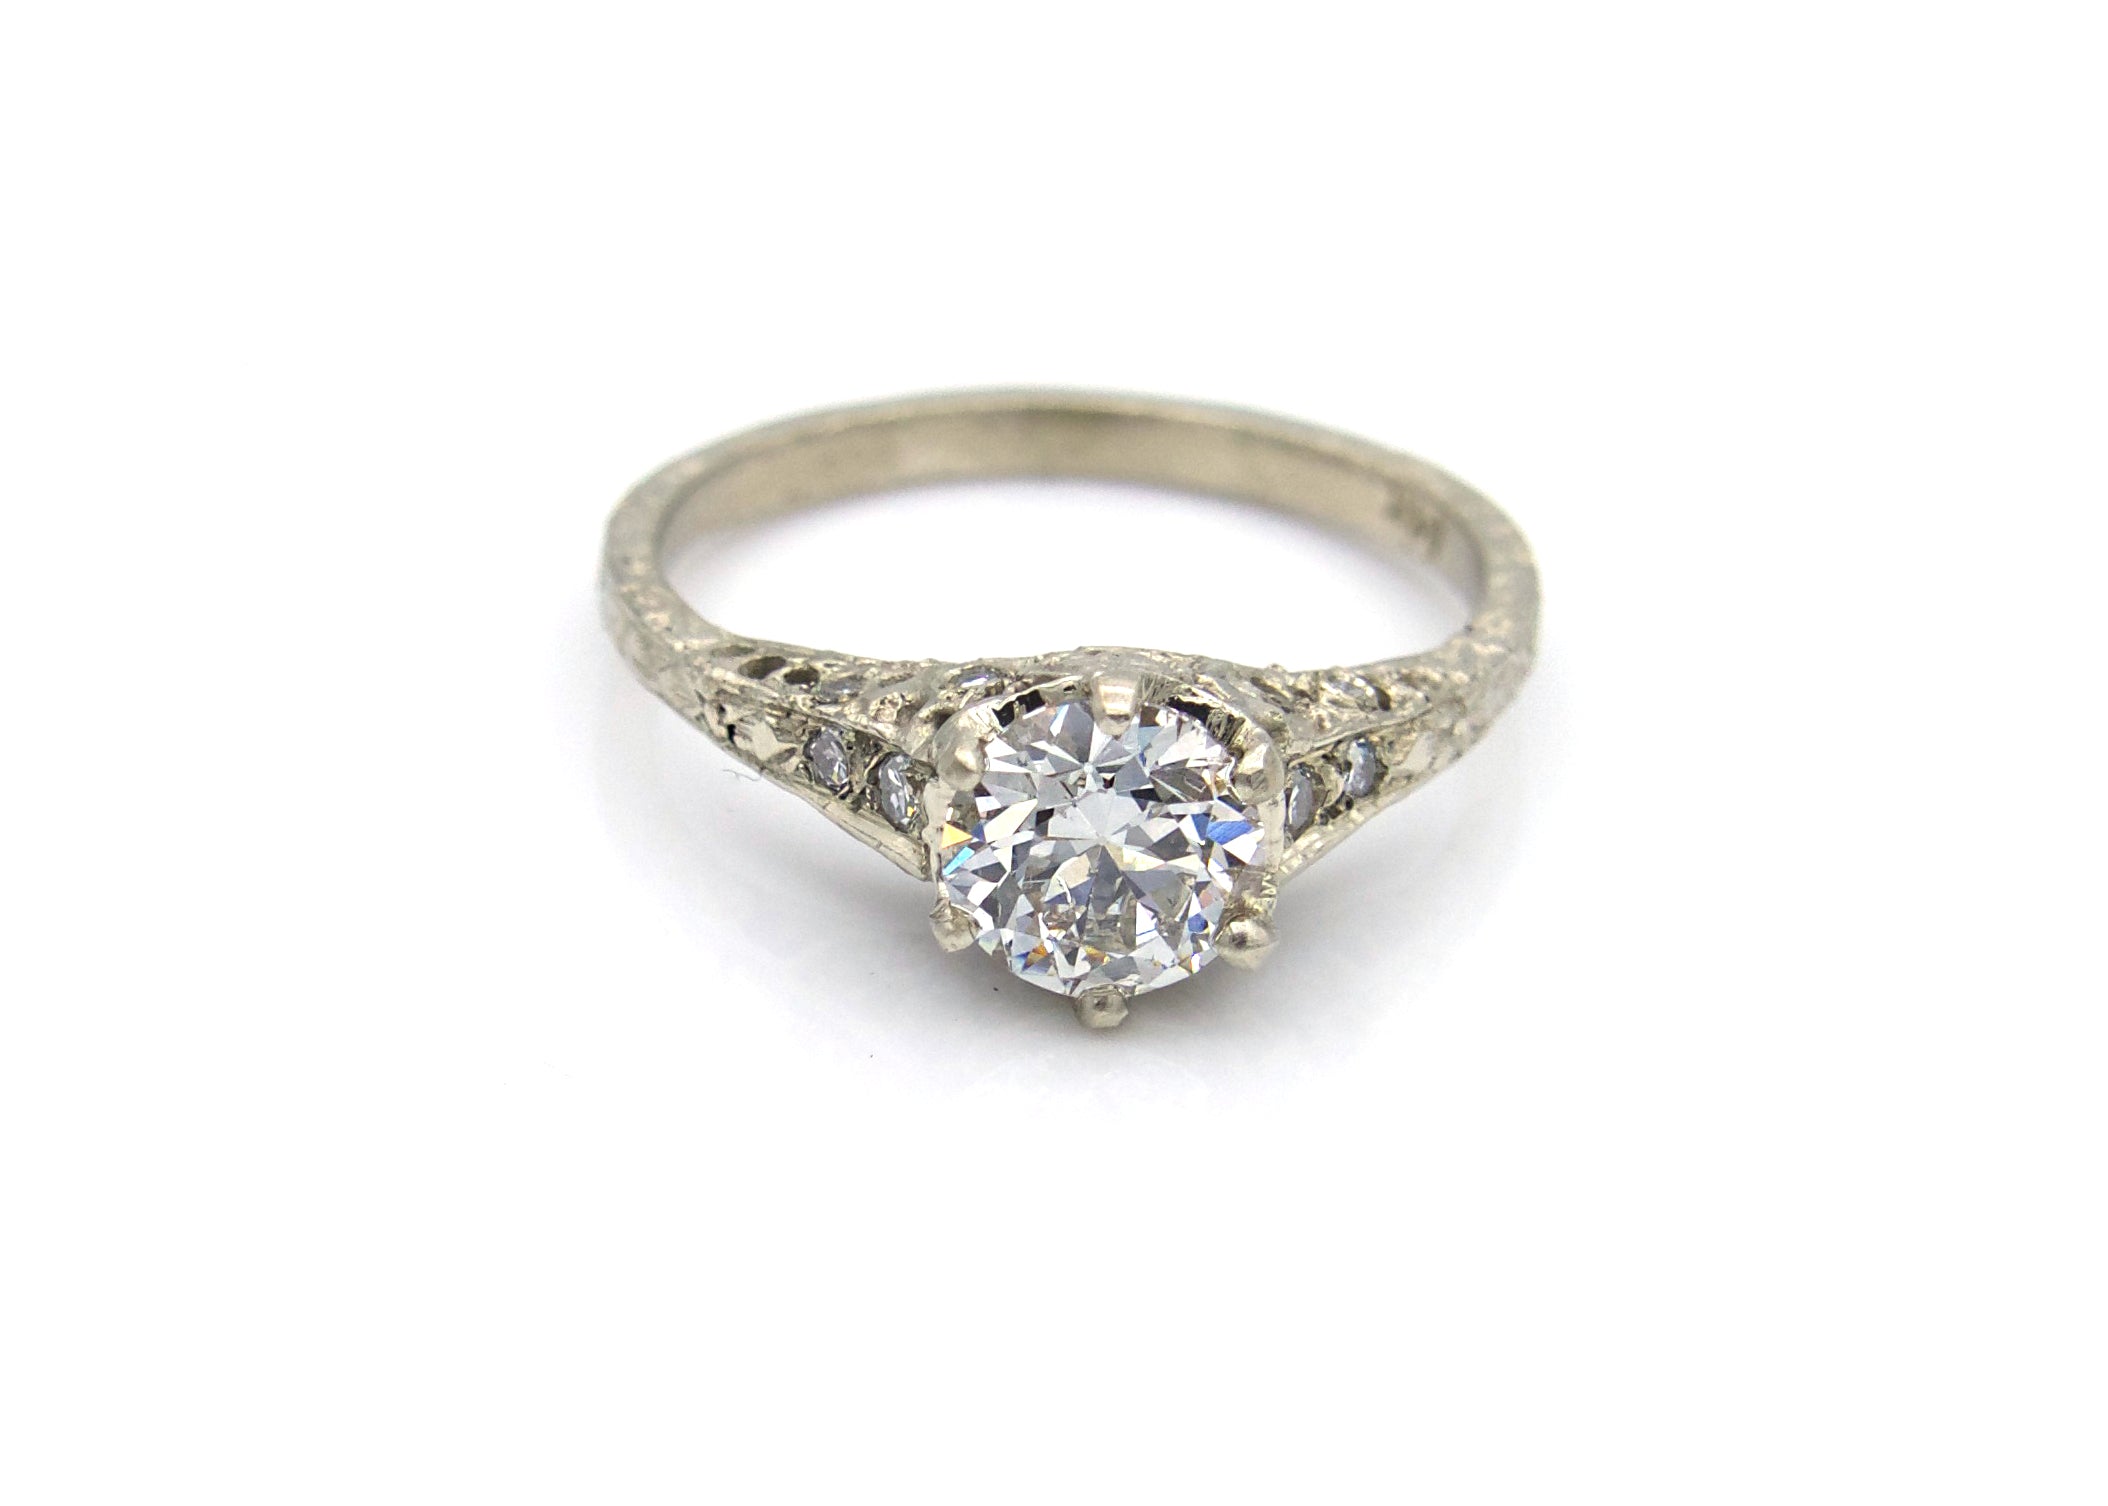 Antique-Style Filigree Diamond and White Gold Engagement Ring